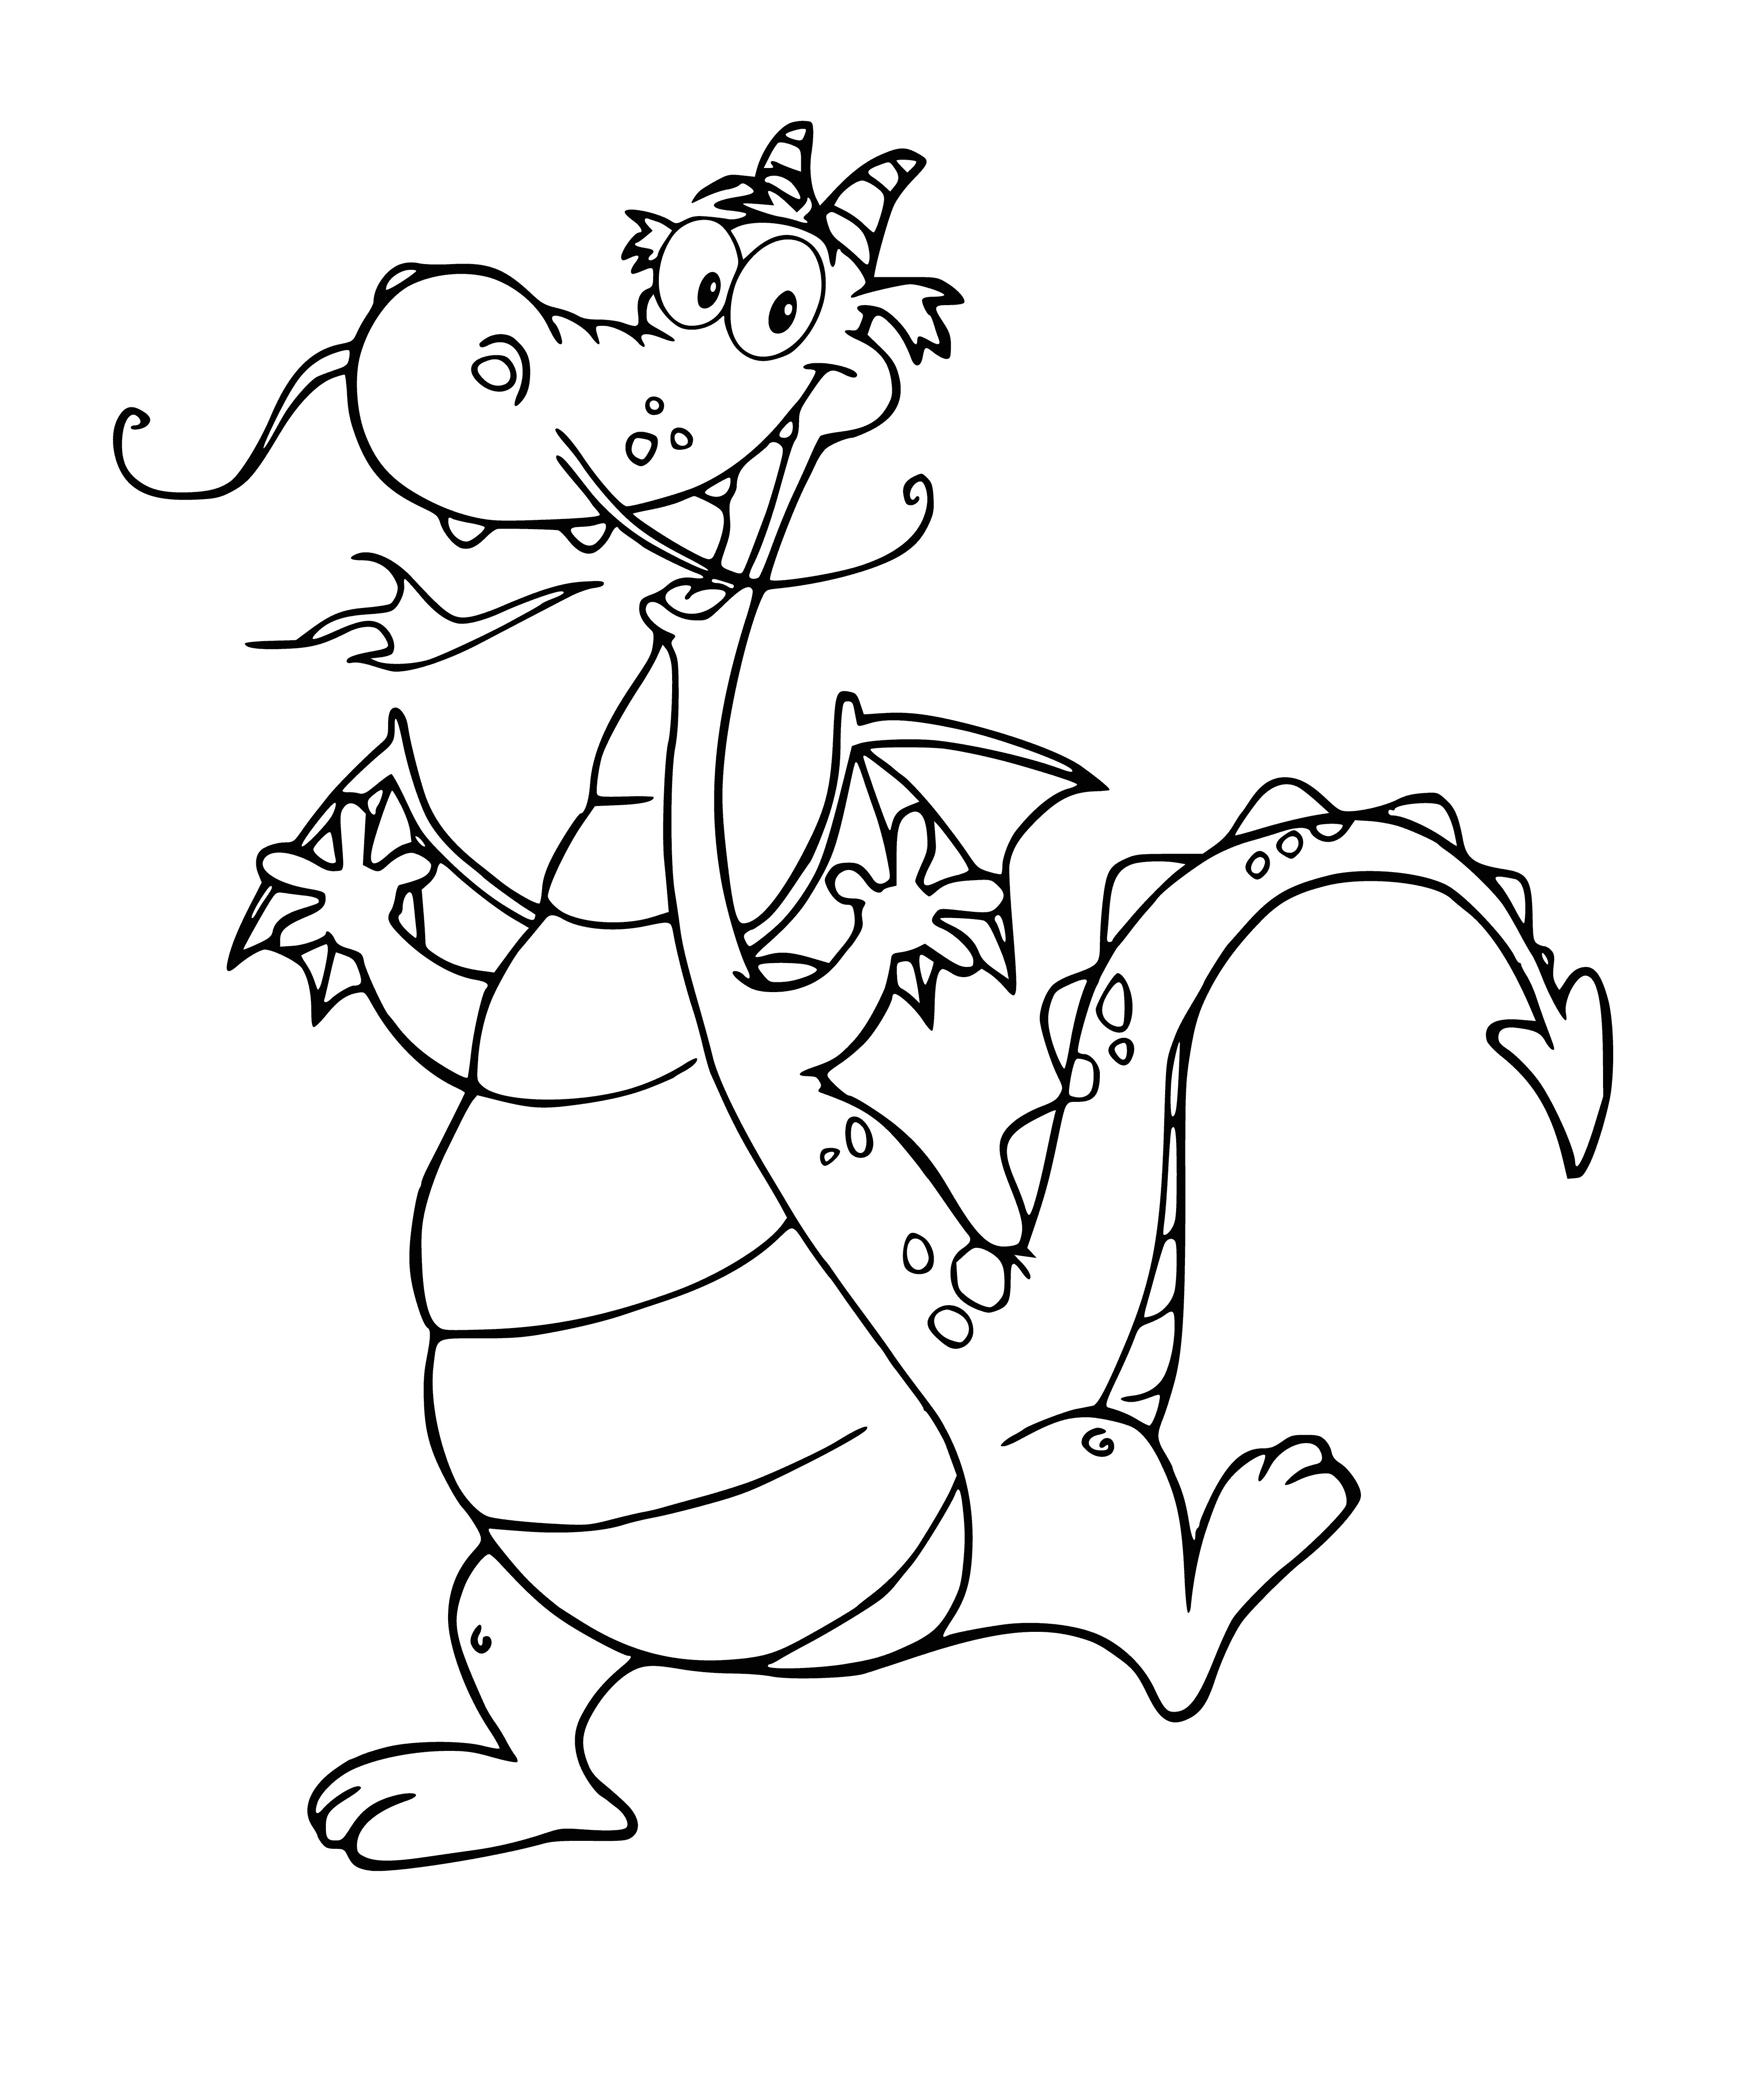 coloring page: Happy dragon has big smile, shining green scales, sparkling eyes, big wings, ready for flight! #Dragon